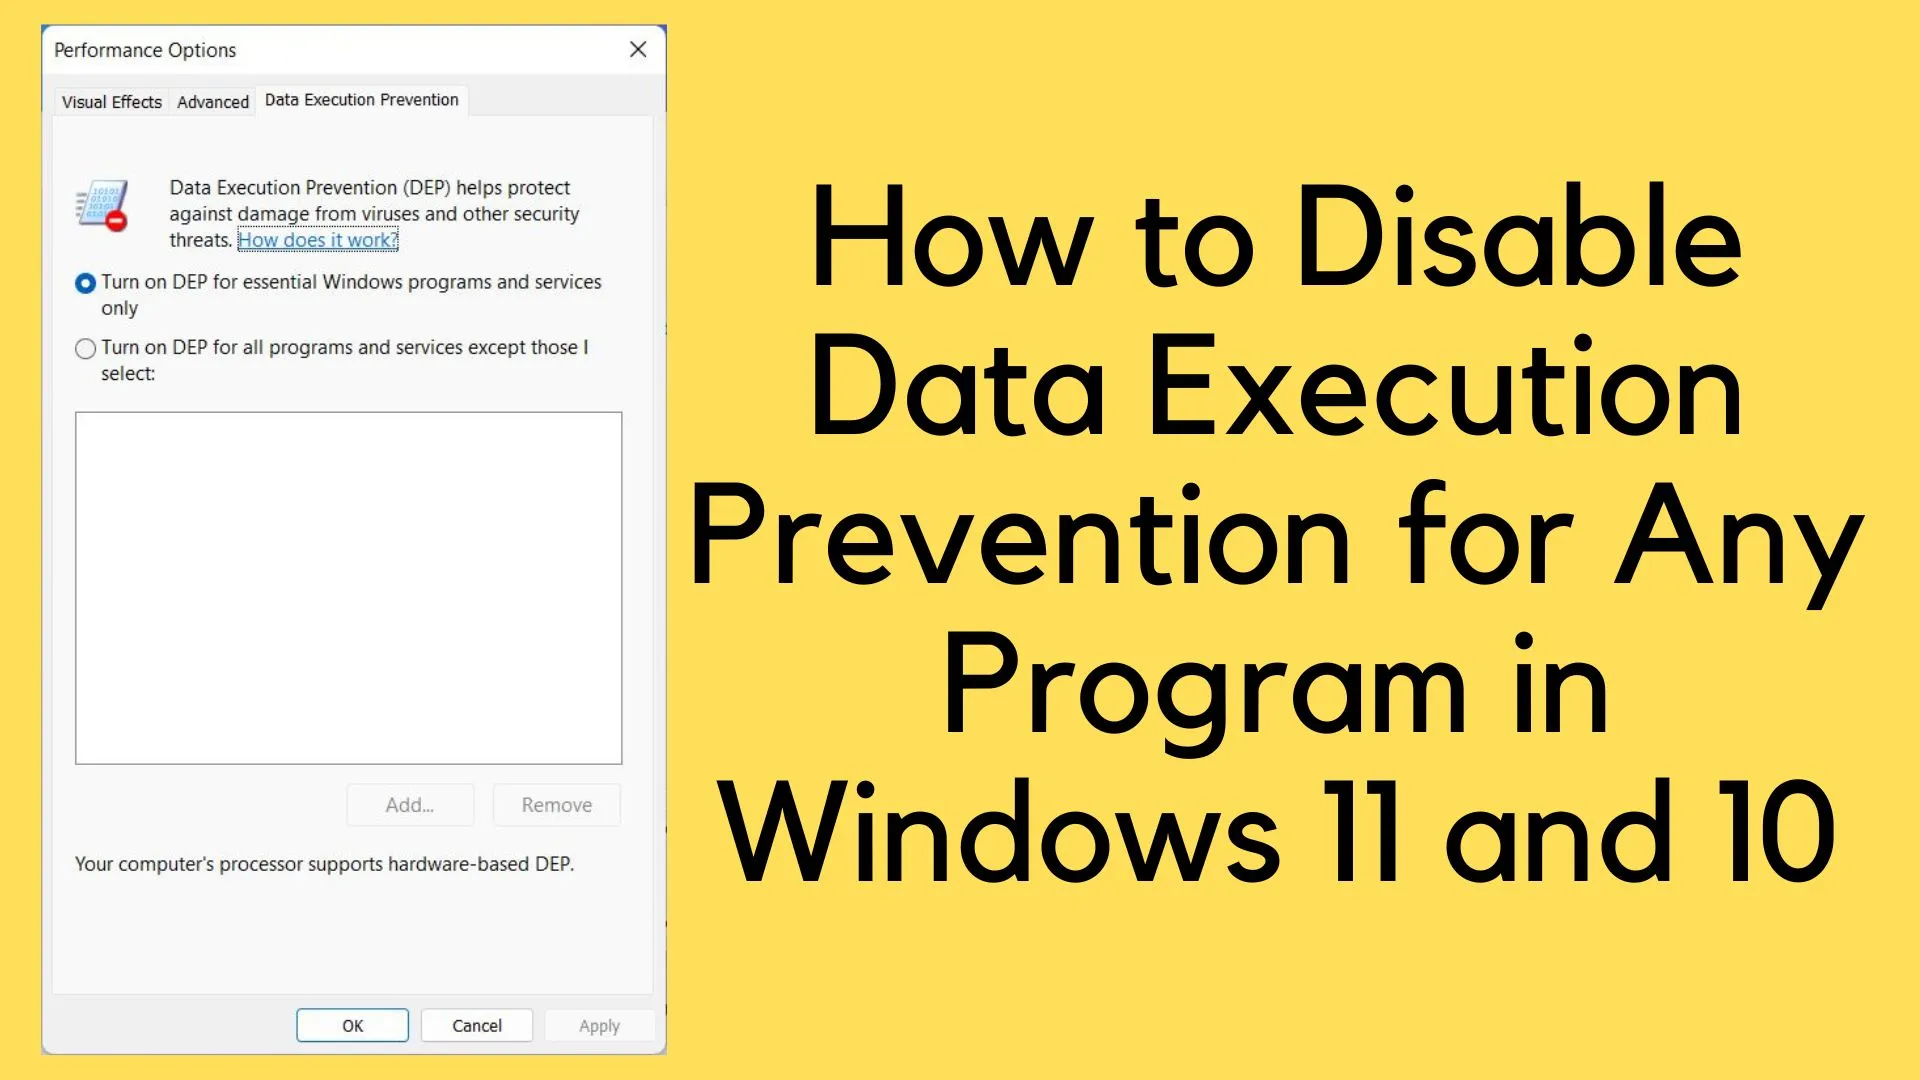 How to Disable Data Execution Prevention for Any Program on Windows 11/10